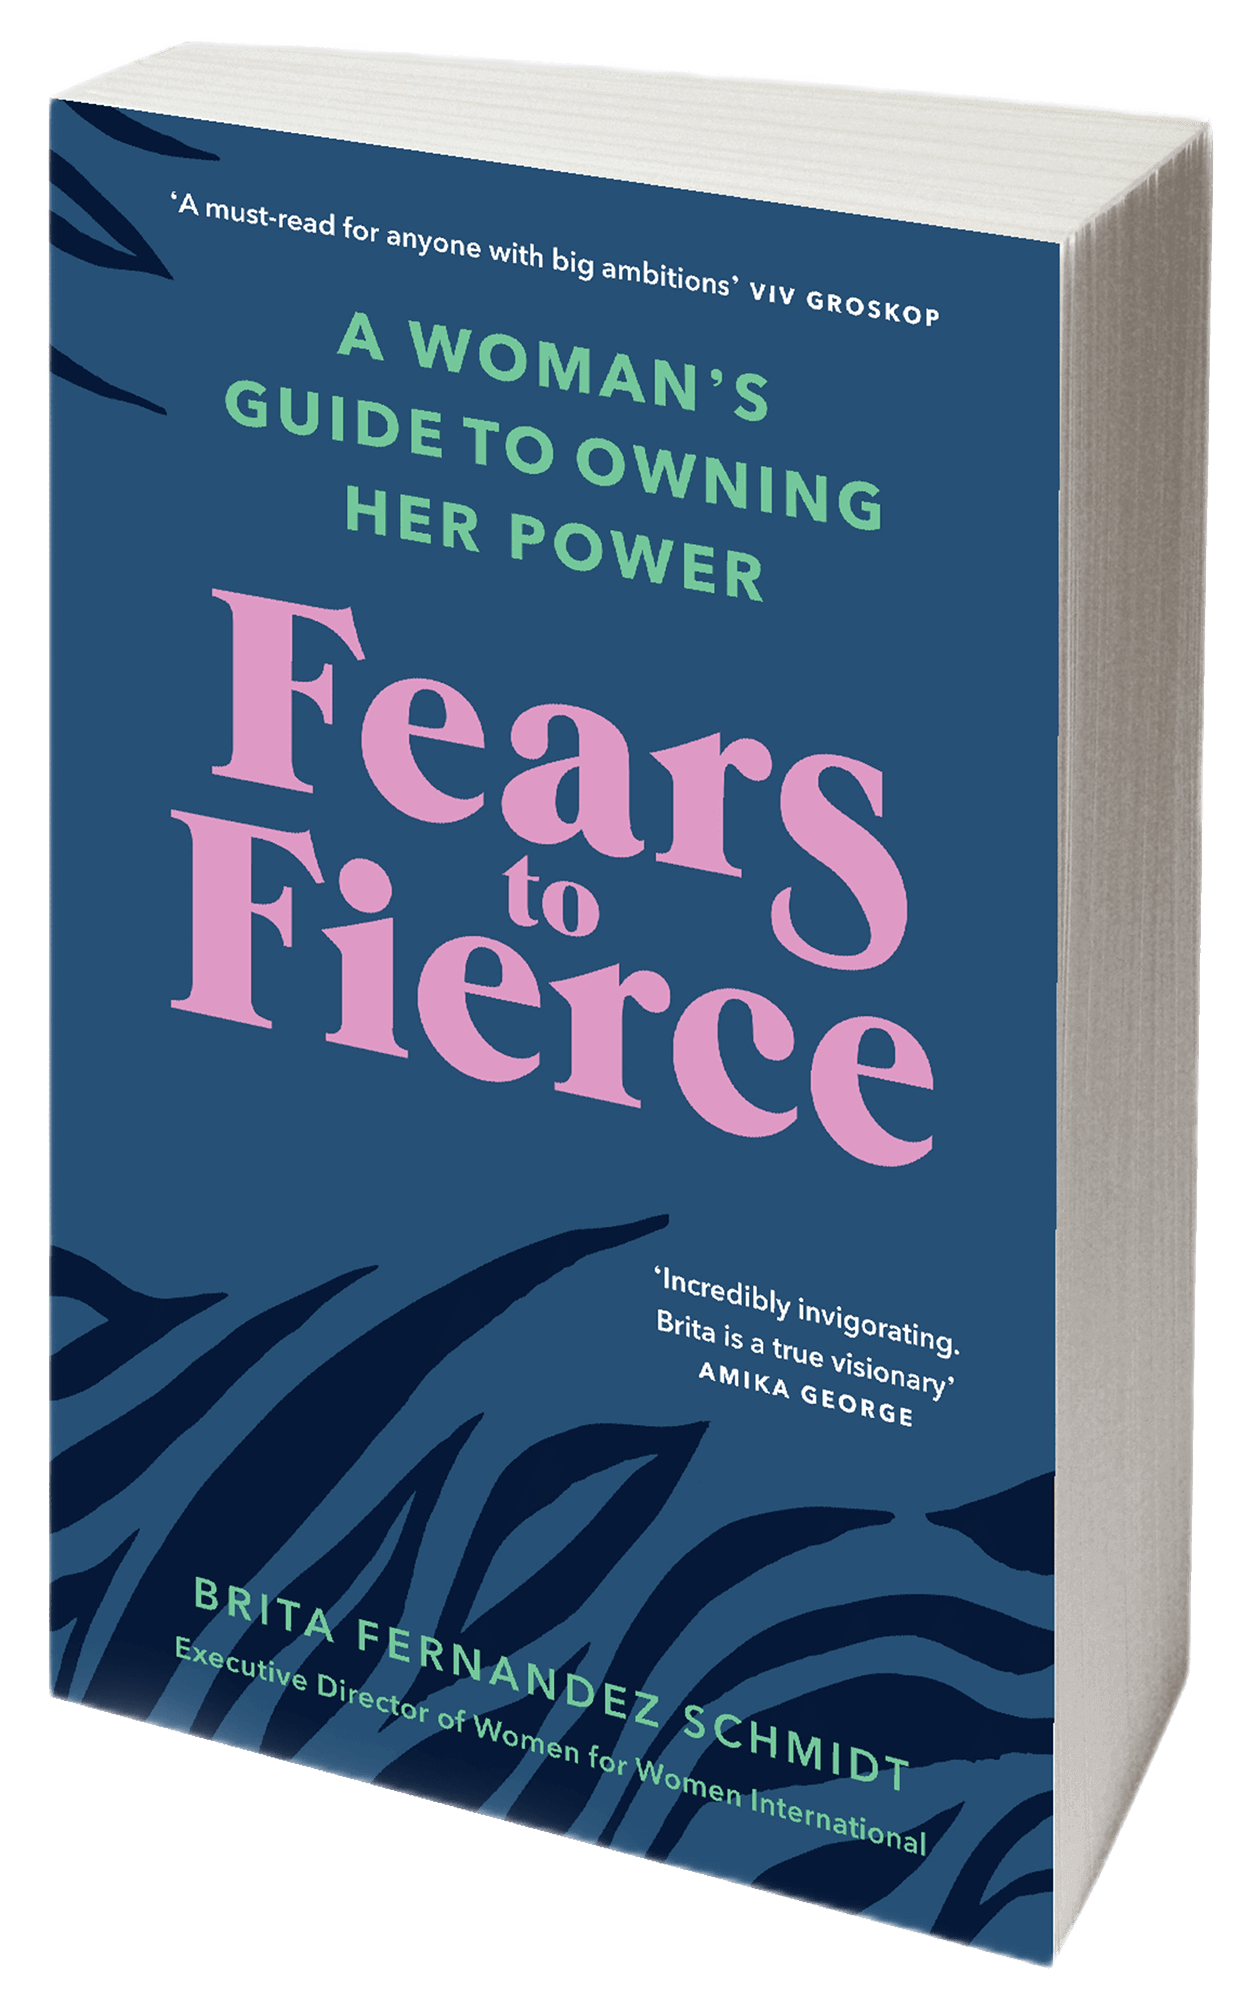 Author Of 'Fears To Fierce' Brita Fernandez Schmidt Shares Her Top Tips For  Owning Your Power